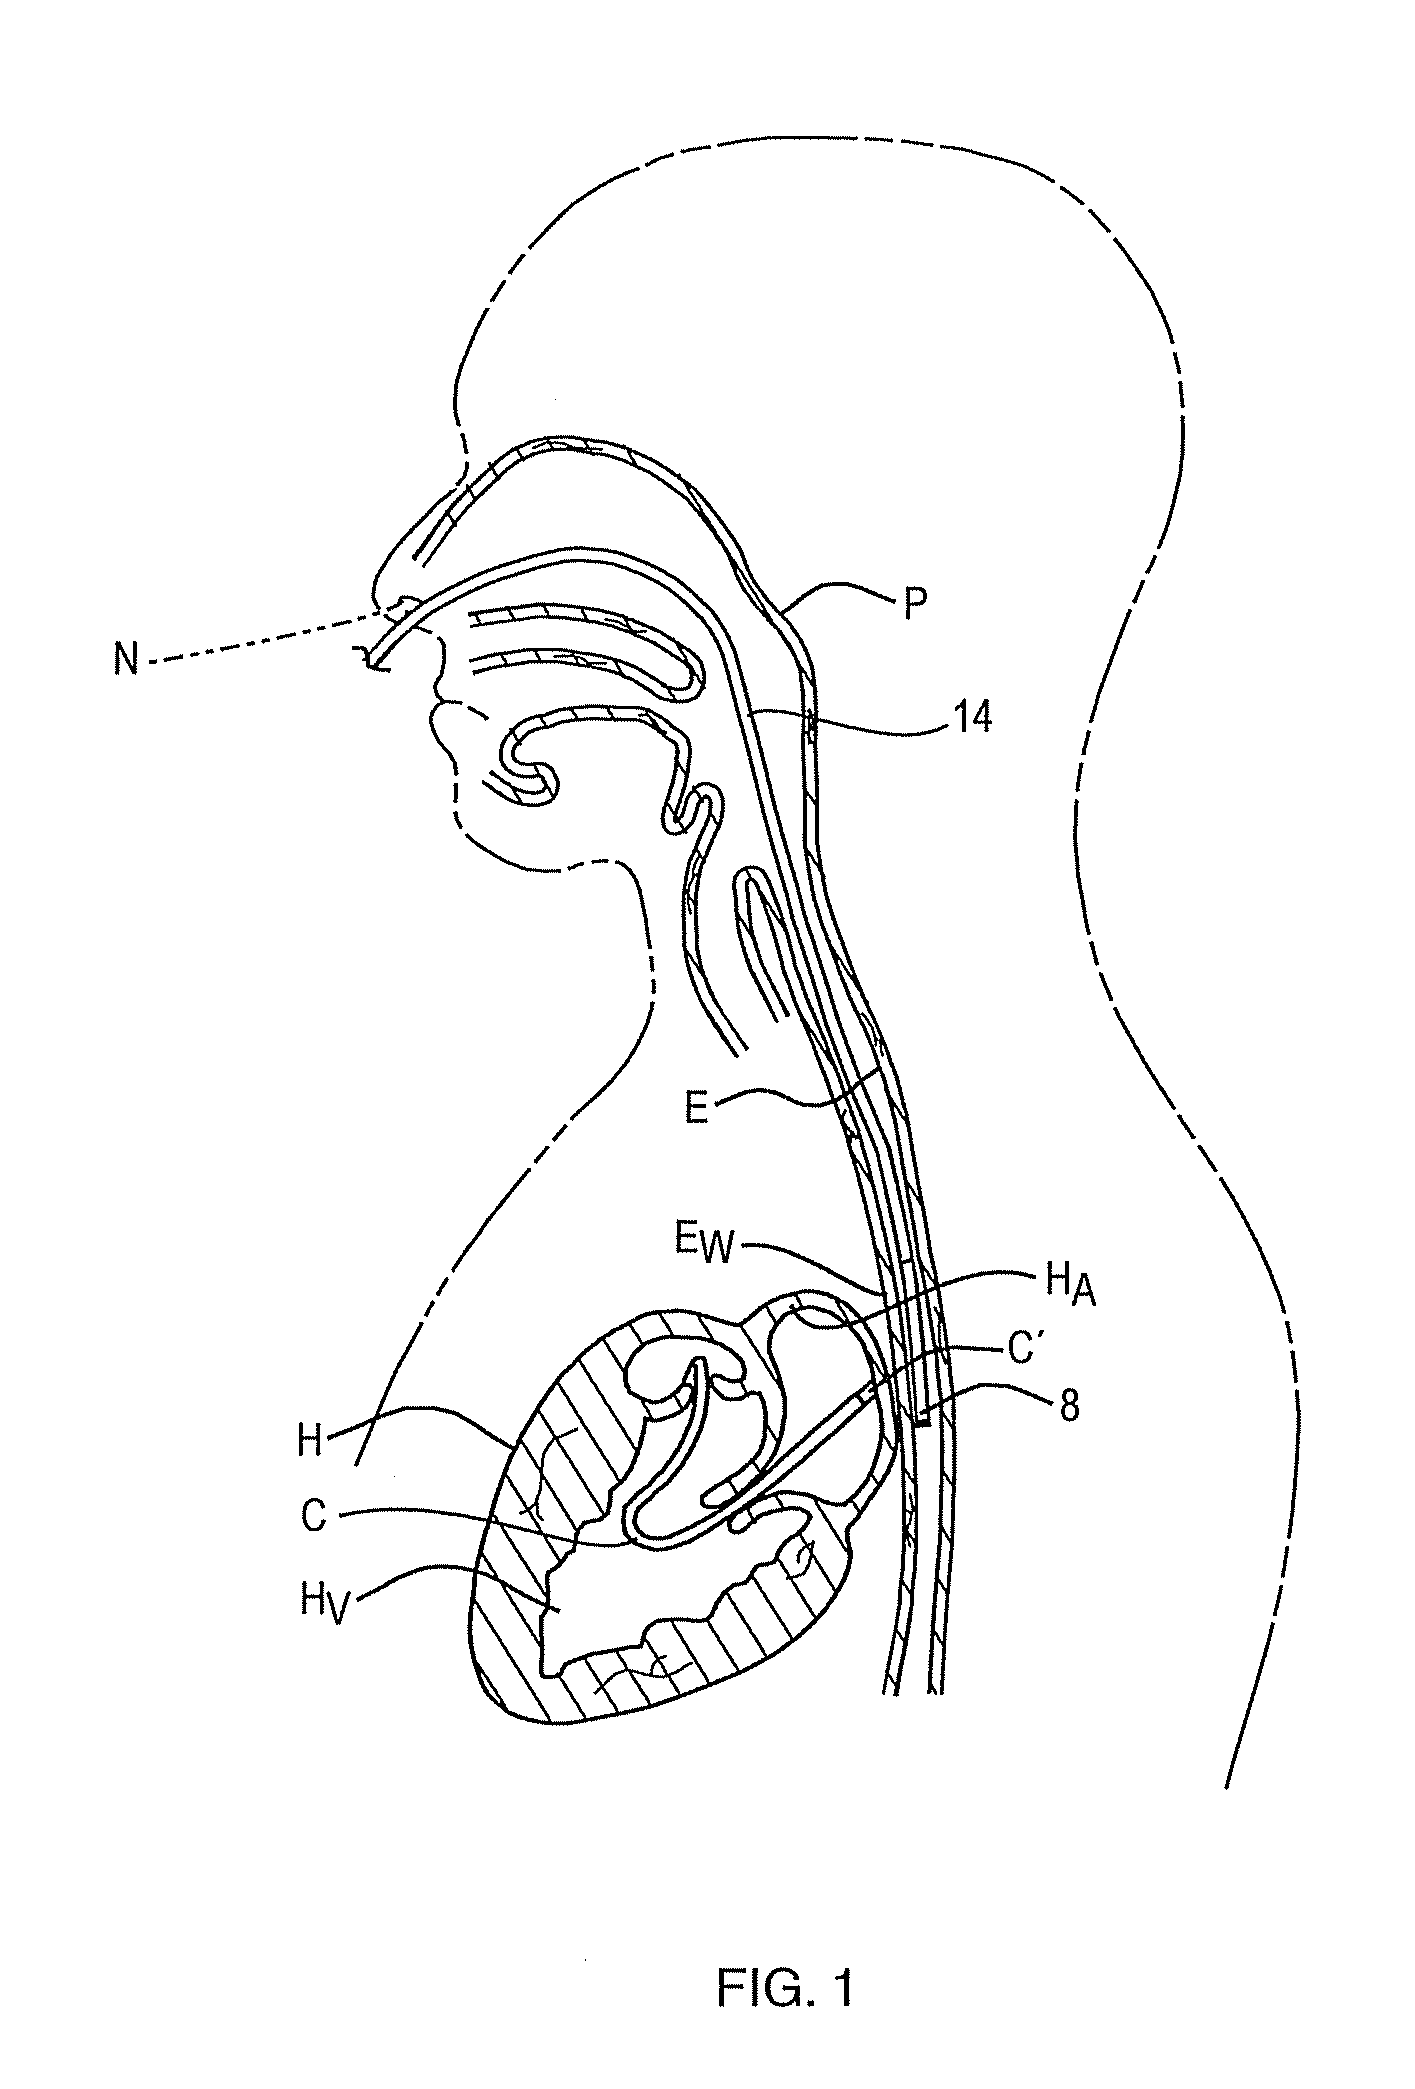 Method and apparatus for minimizing thermal trauma to an organ during tissue ablation of a different organ